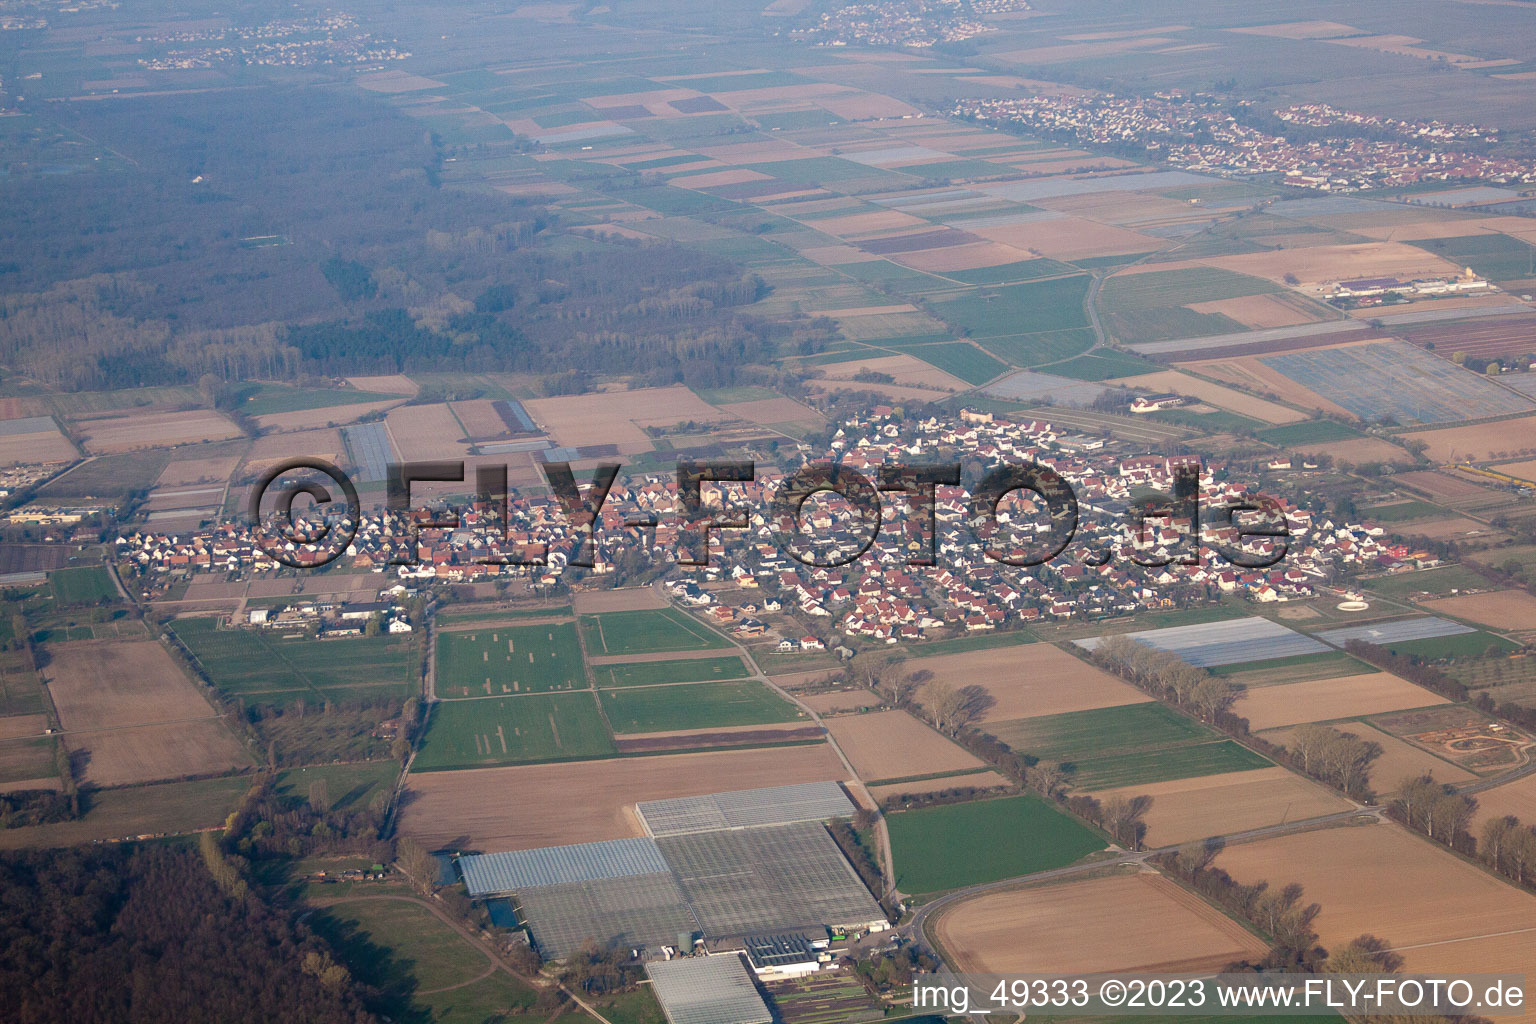 Zeiskam in the state Rhineland-Palatinate, Germany seen from a drone